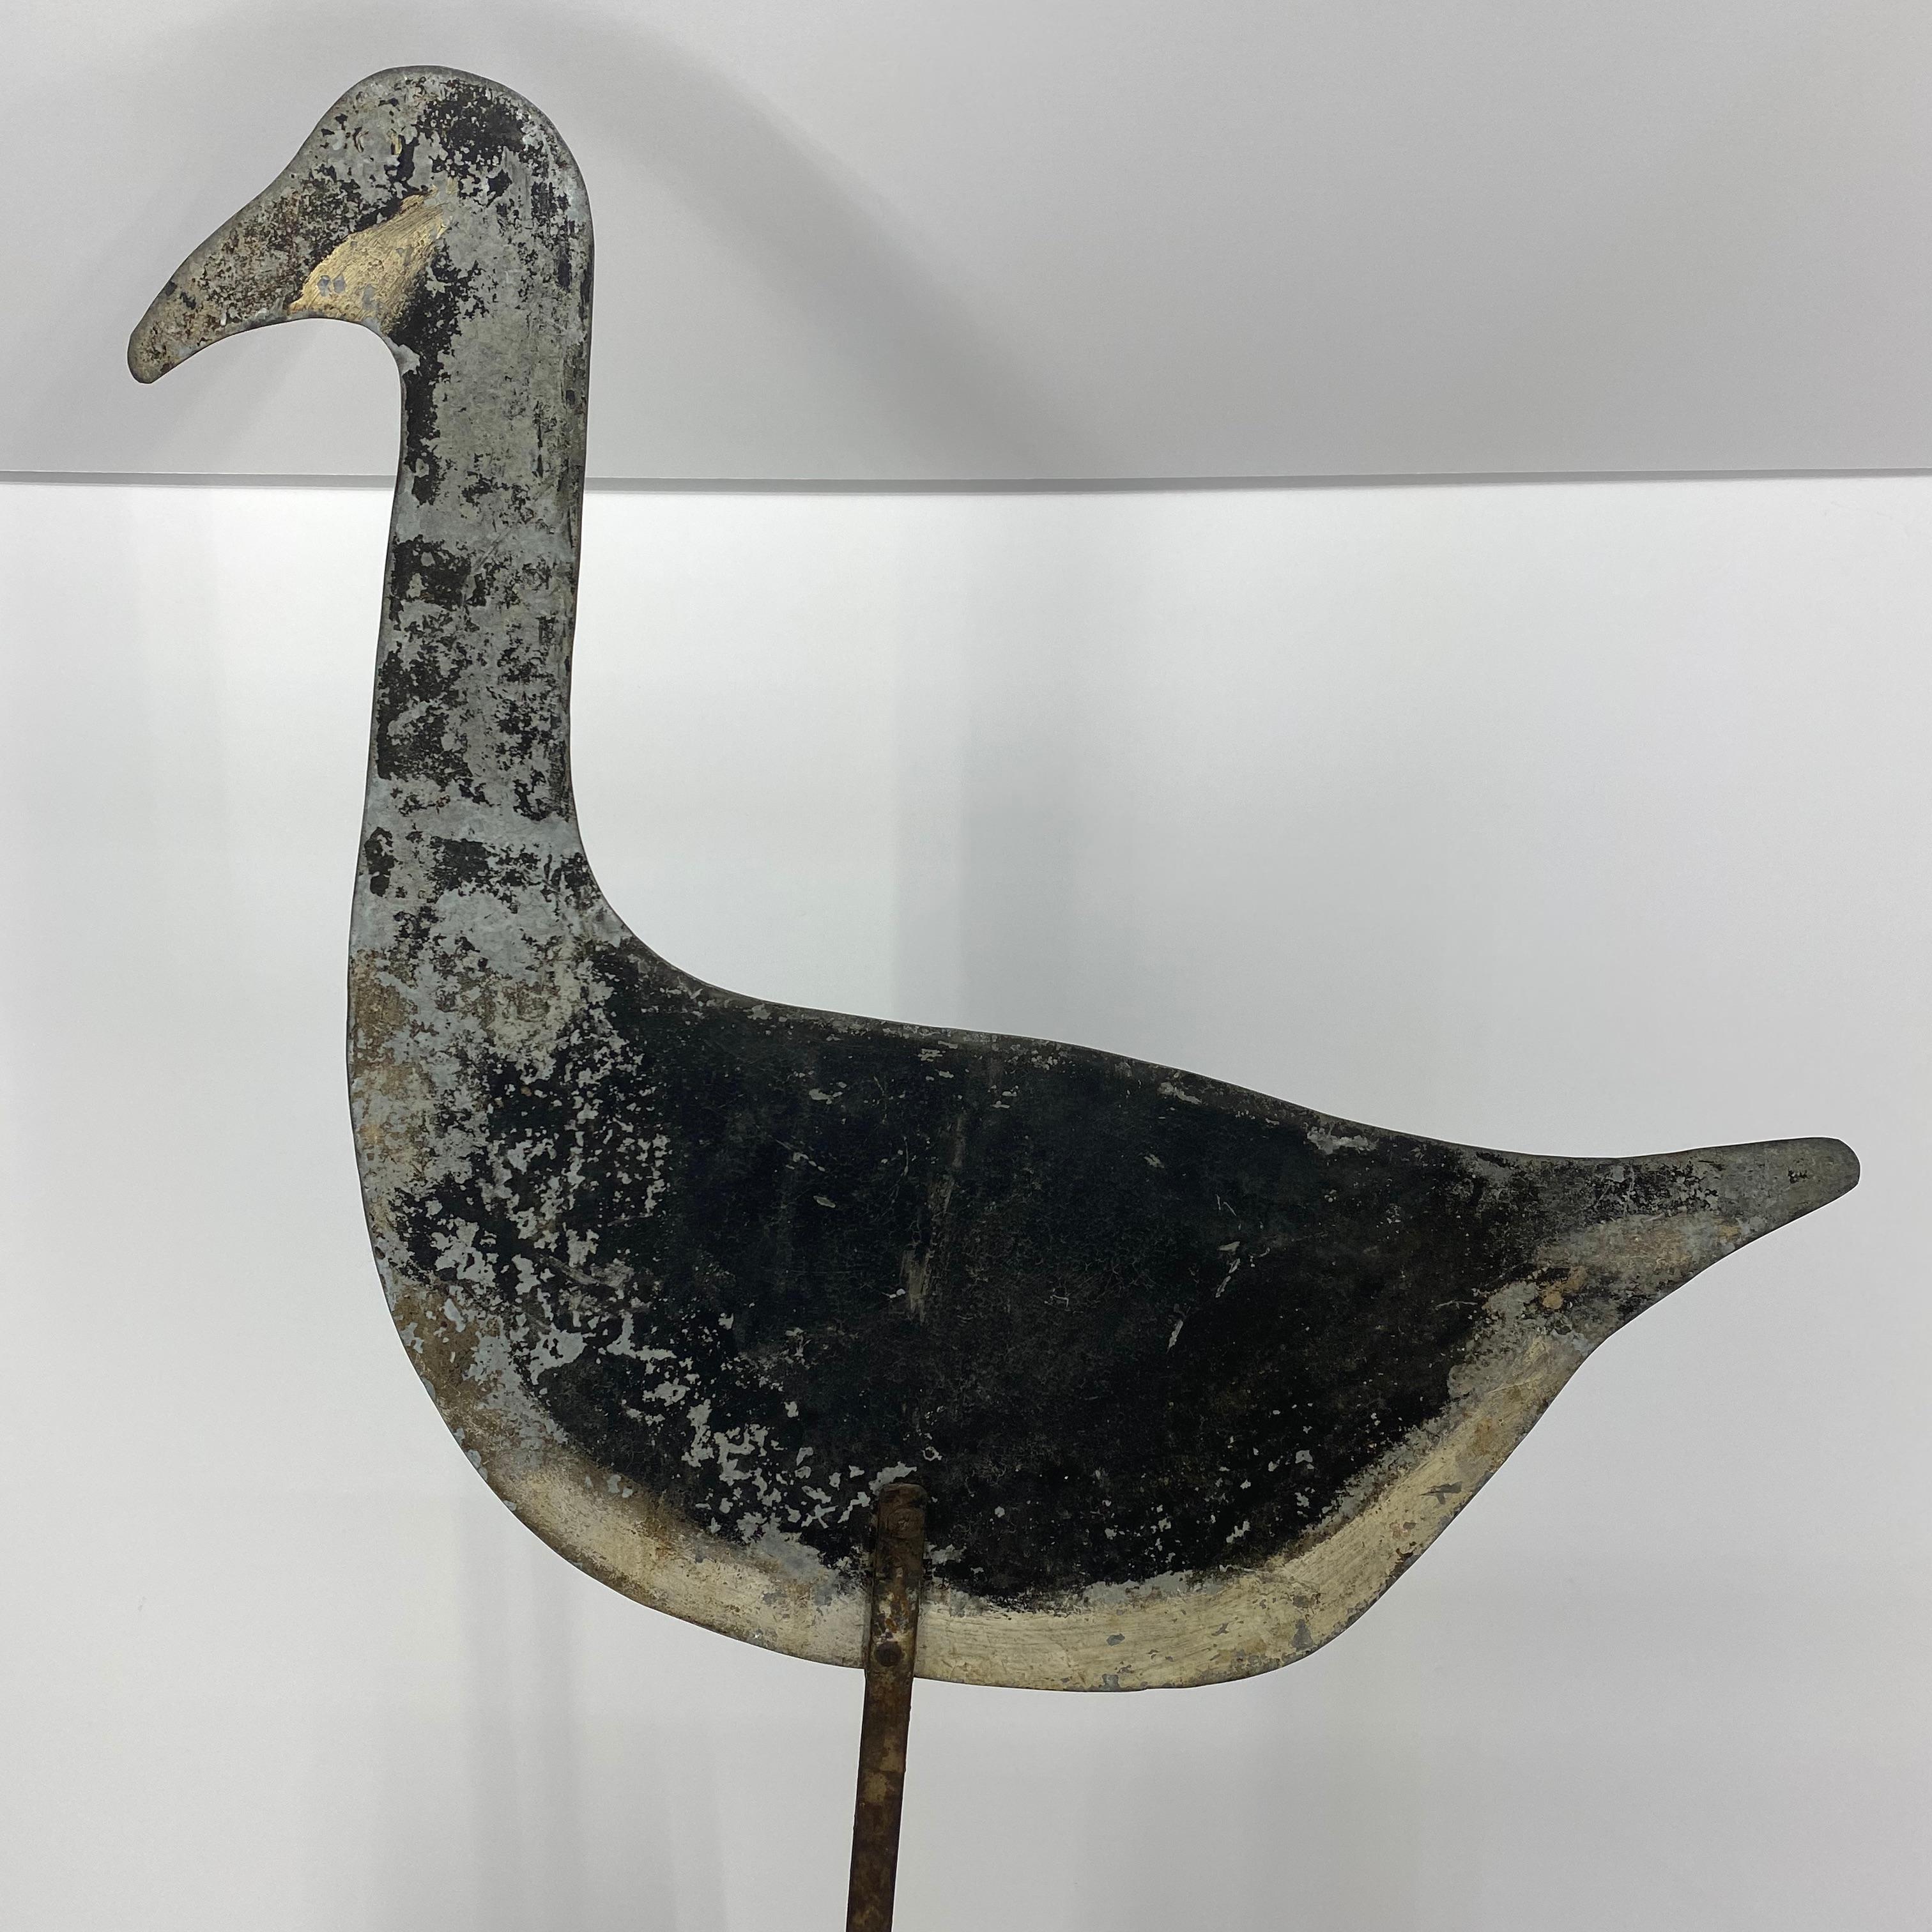 Painted toleware metal goose decoy table sculpture, America, 1930s

The metal decoy is seated in basic custom made oval wooden base.